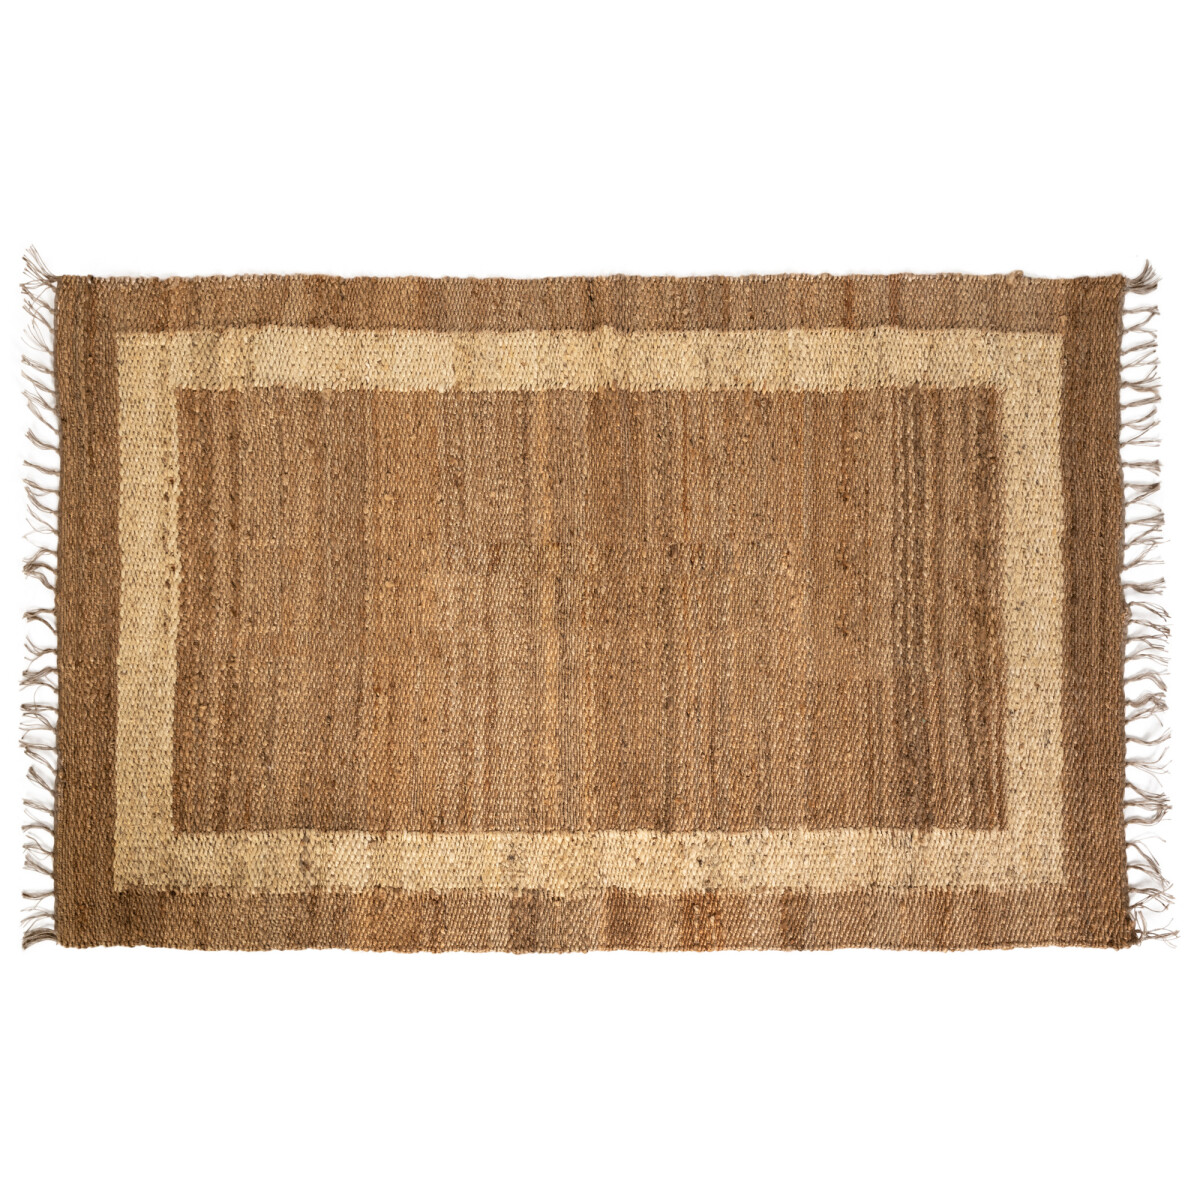 ALFOMBRA - YUTE NATURAL-BEIGE BARRIE 